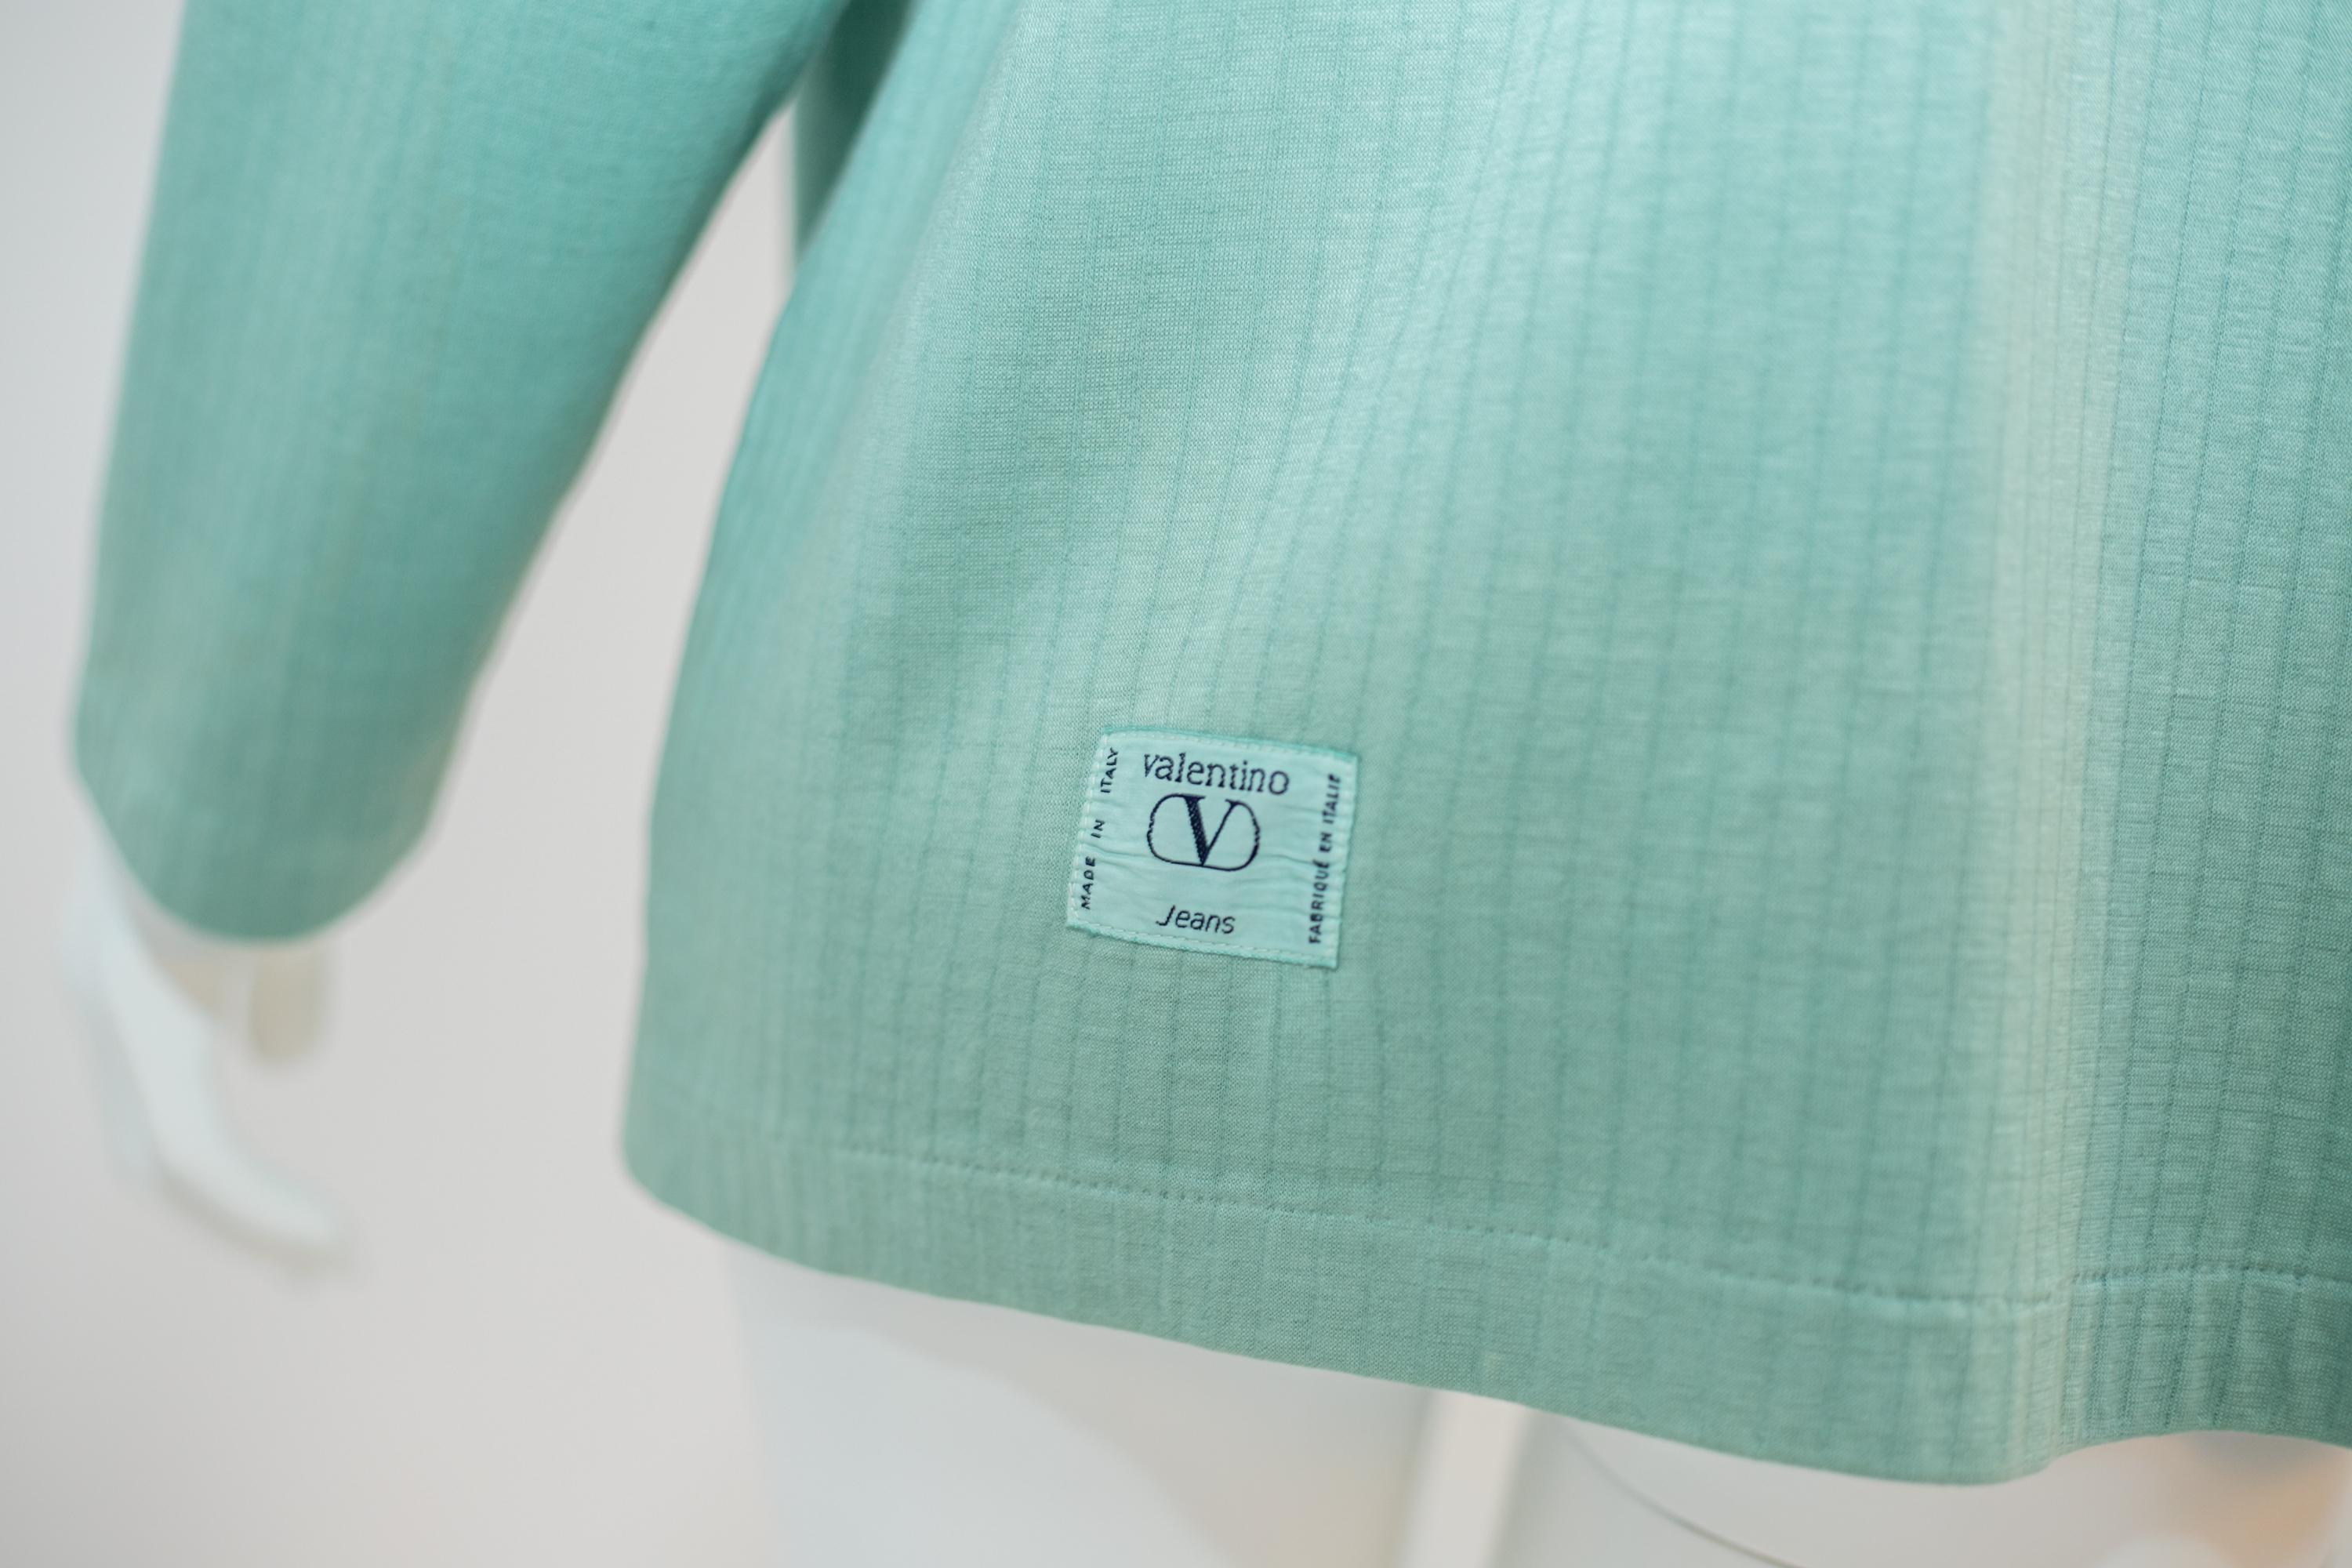 Rare vintage green jacket designed by Valentino in the early 1980s, of fine Italian manufacture. Original inner and outer label. External logo.
The jacket is lightweight and made of a beautiful teal fabric, very chic.
The jacket has a very